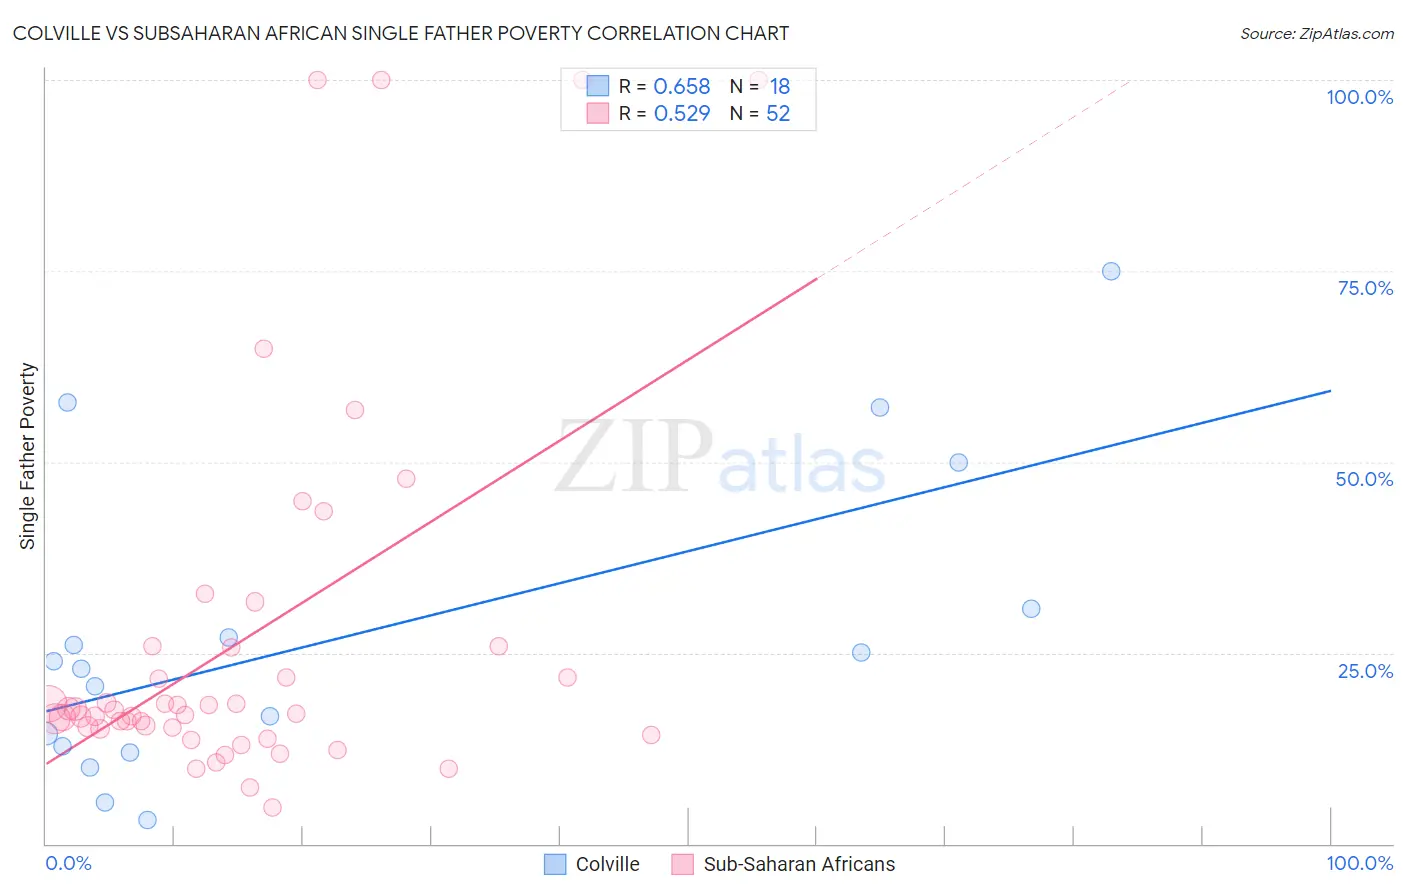 Colville vs Subsaharan African Single Father Poverty